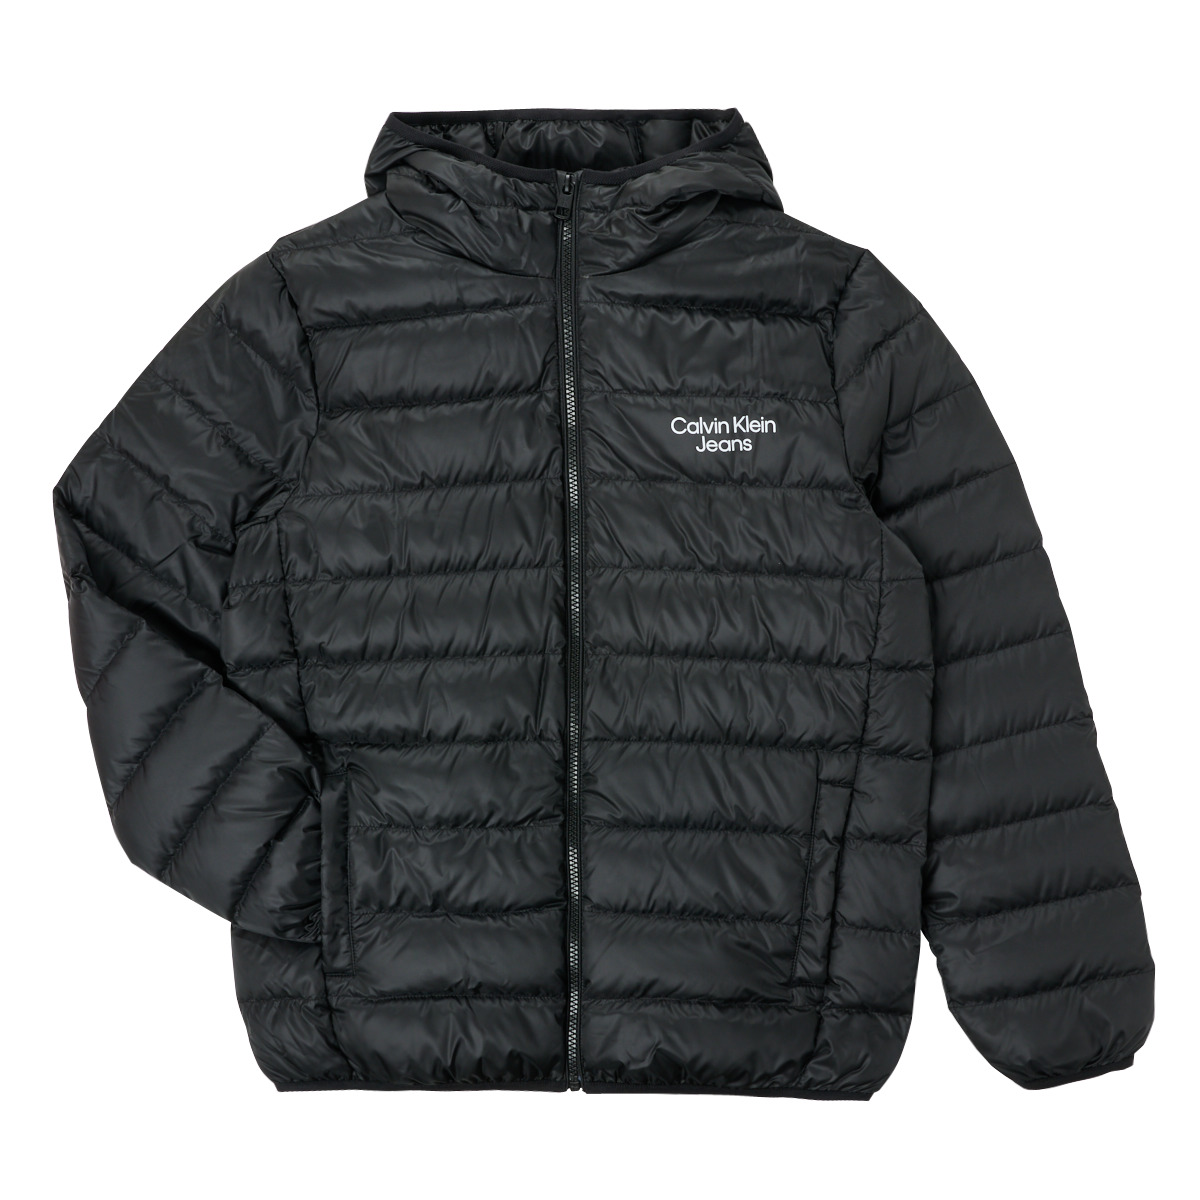 Calvin Klein delivery ! DOWN | Free Spartoo Duffel LOGO LW Black coats Clothing Jeans - - JACKET Child NET